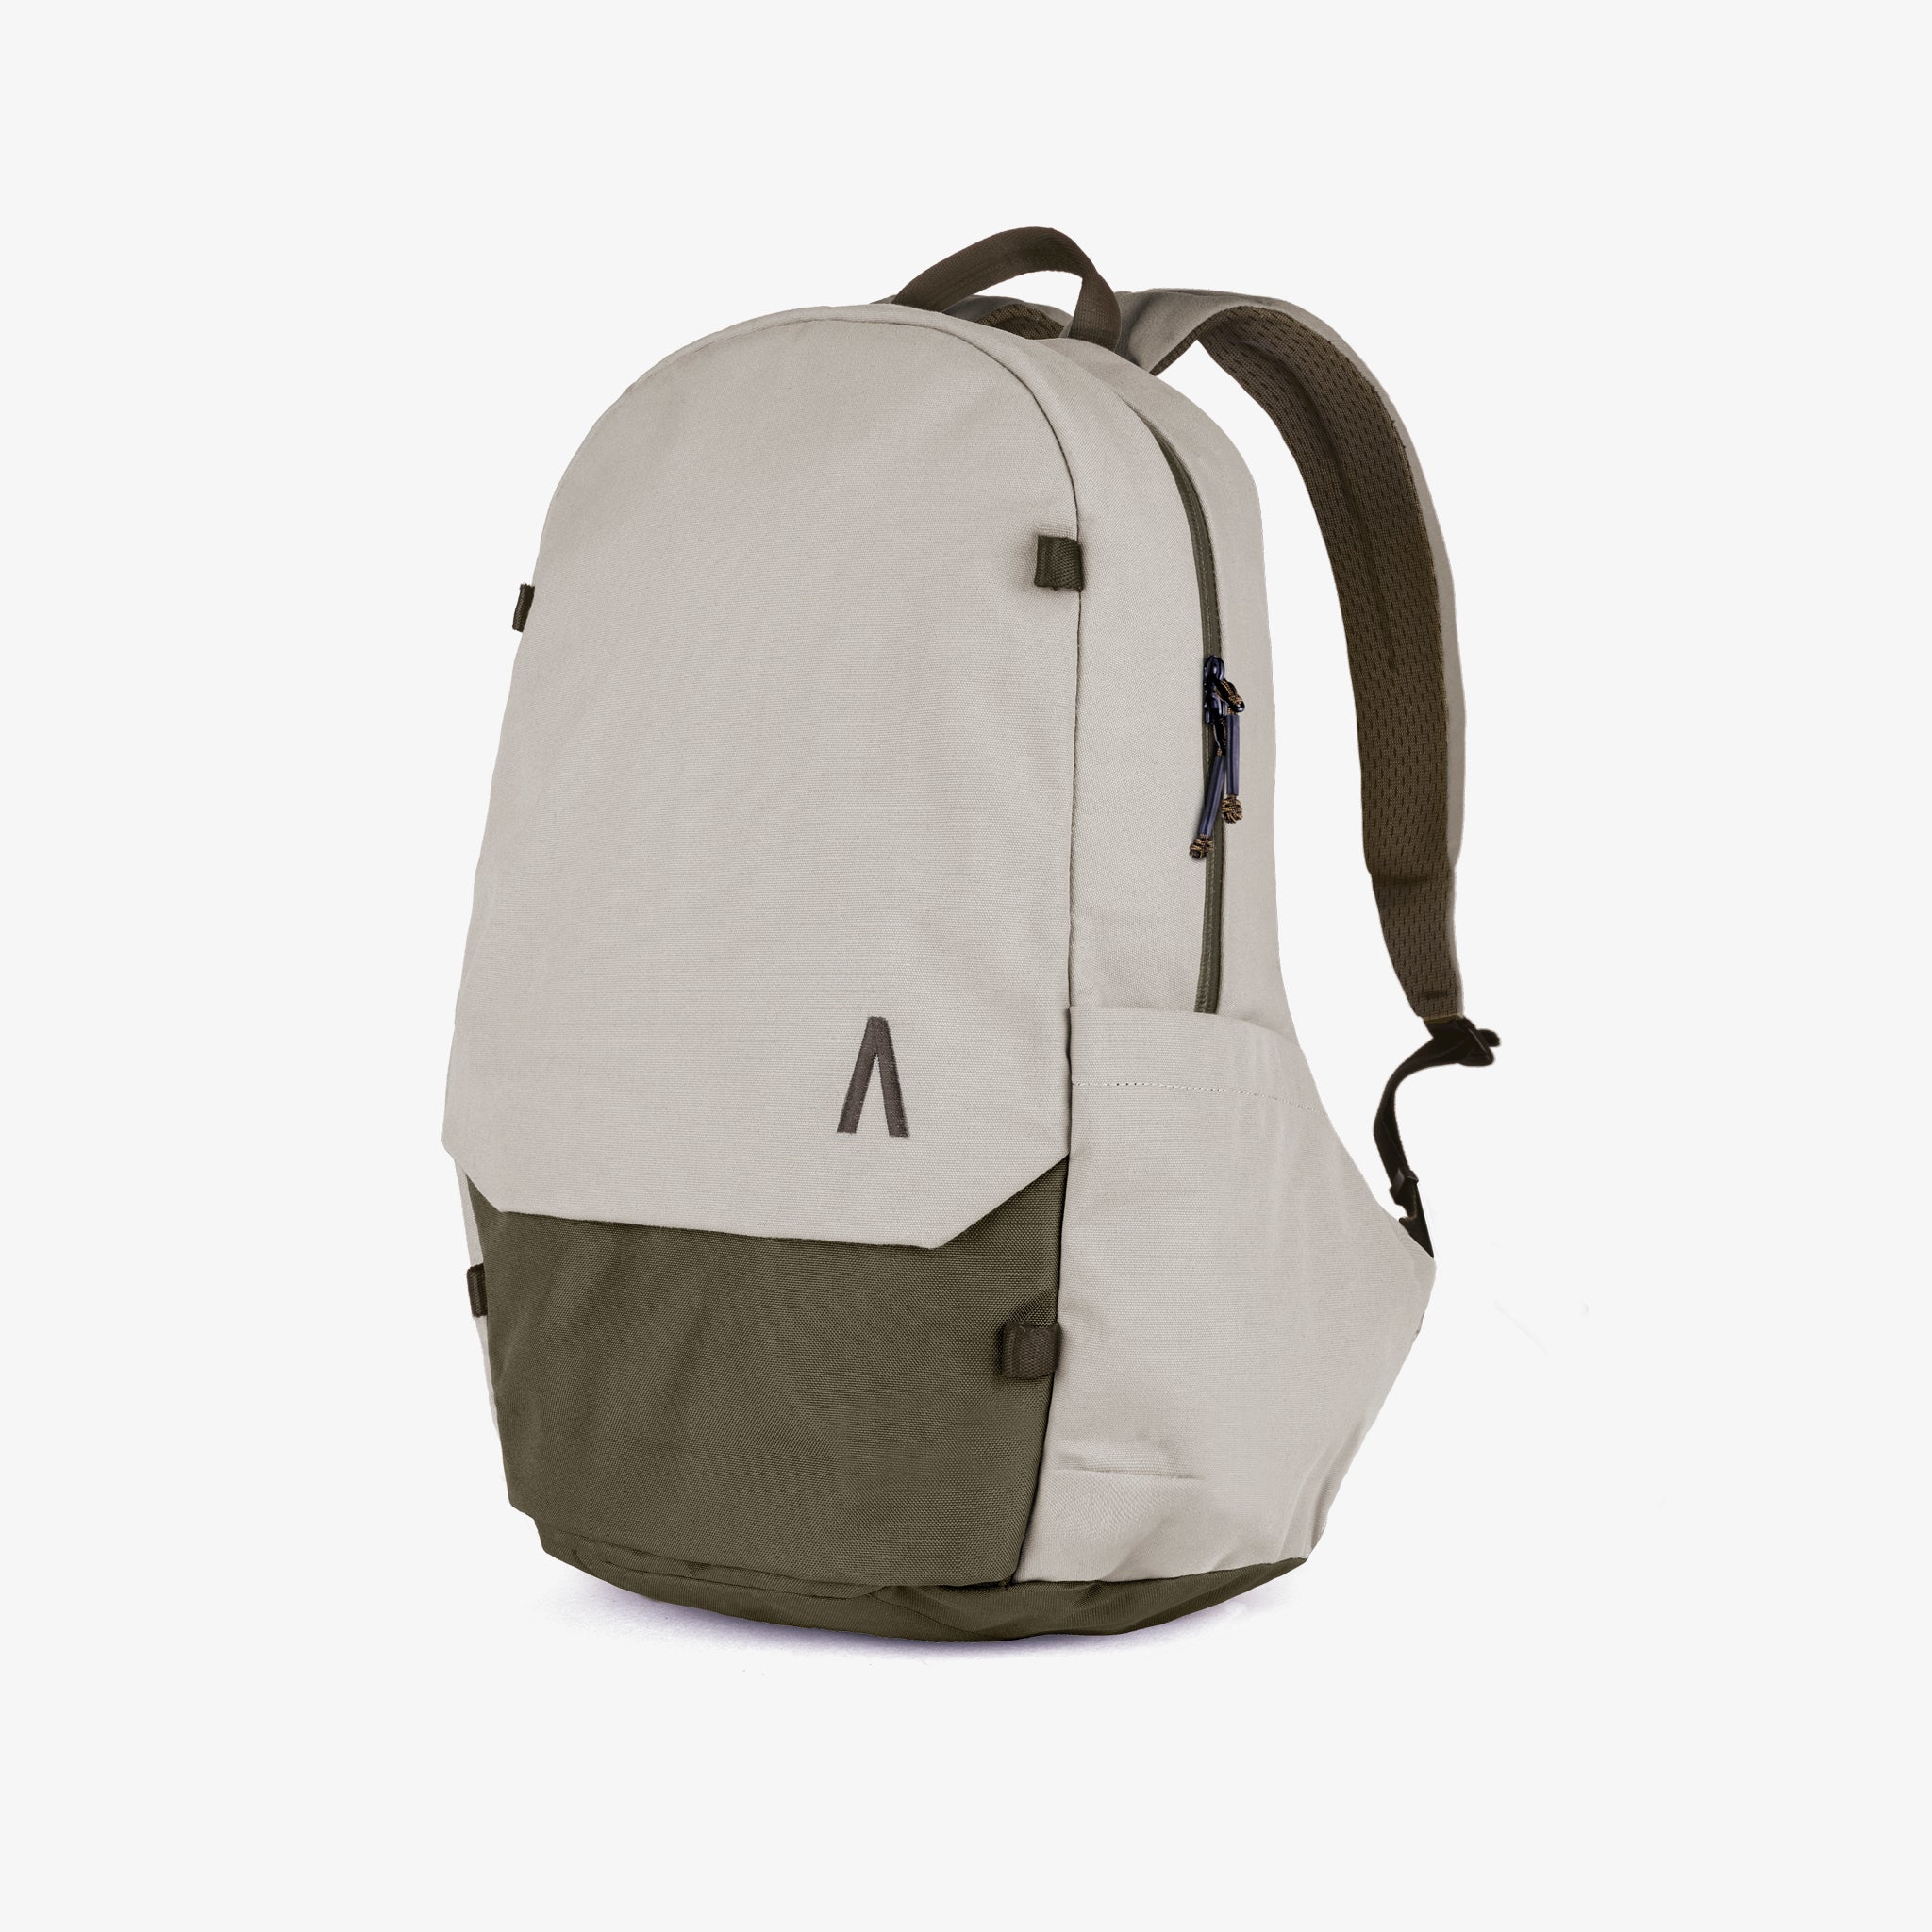 Angled view of a Rennen Recycled Daypack.